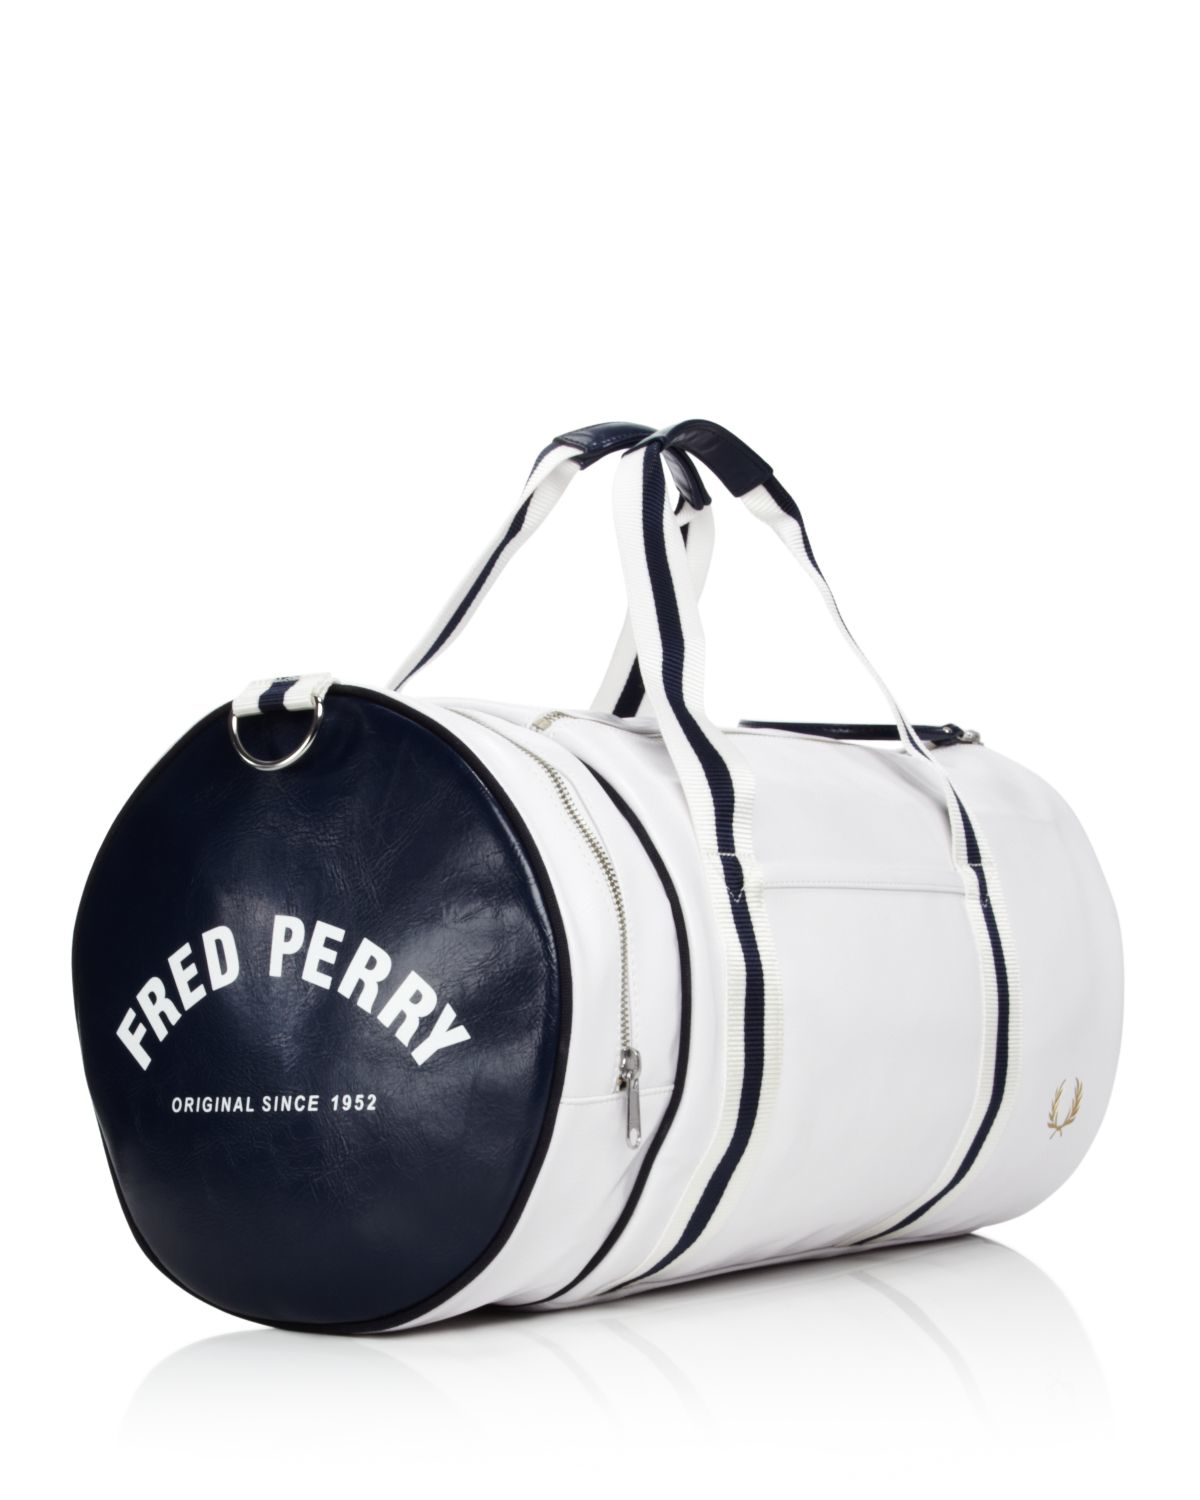 Fred Perry Classic Barrel Bag in White/Navy (White) for Men - Lyst